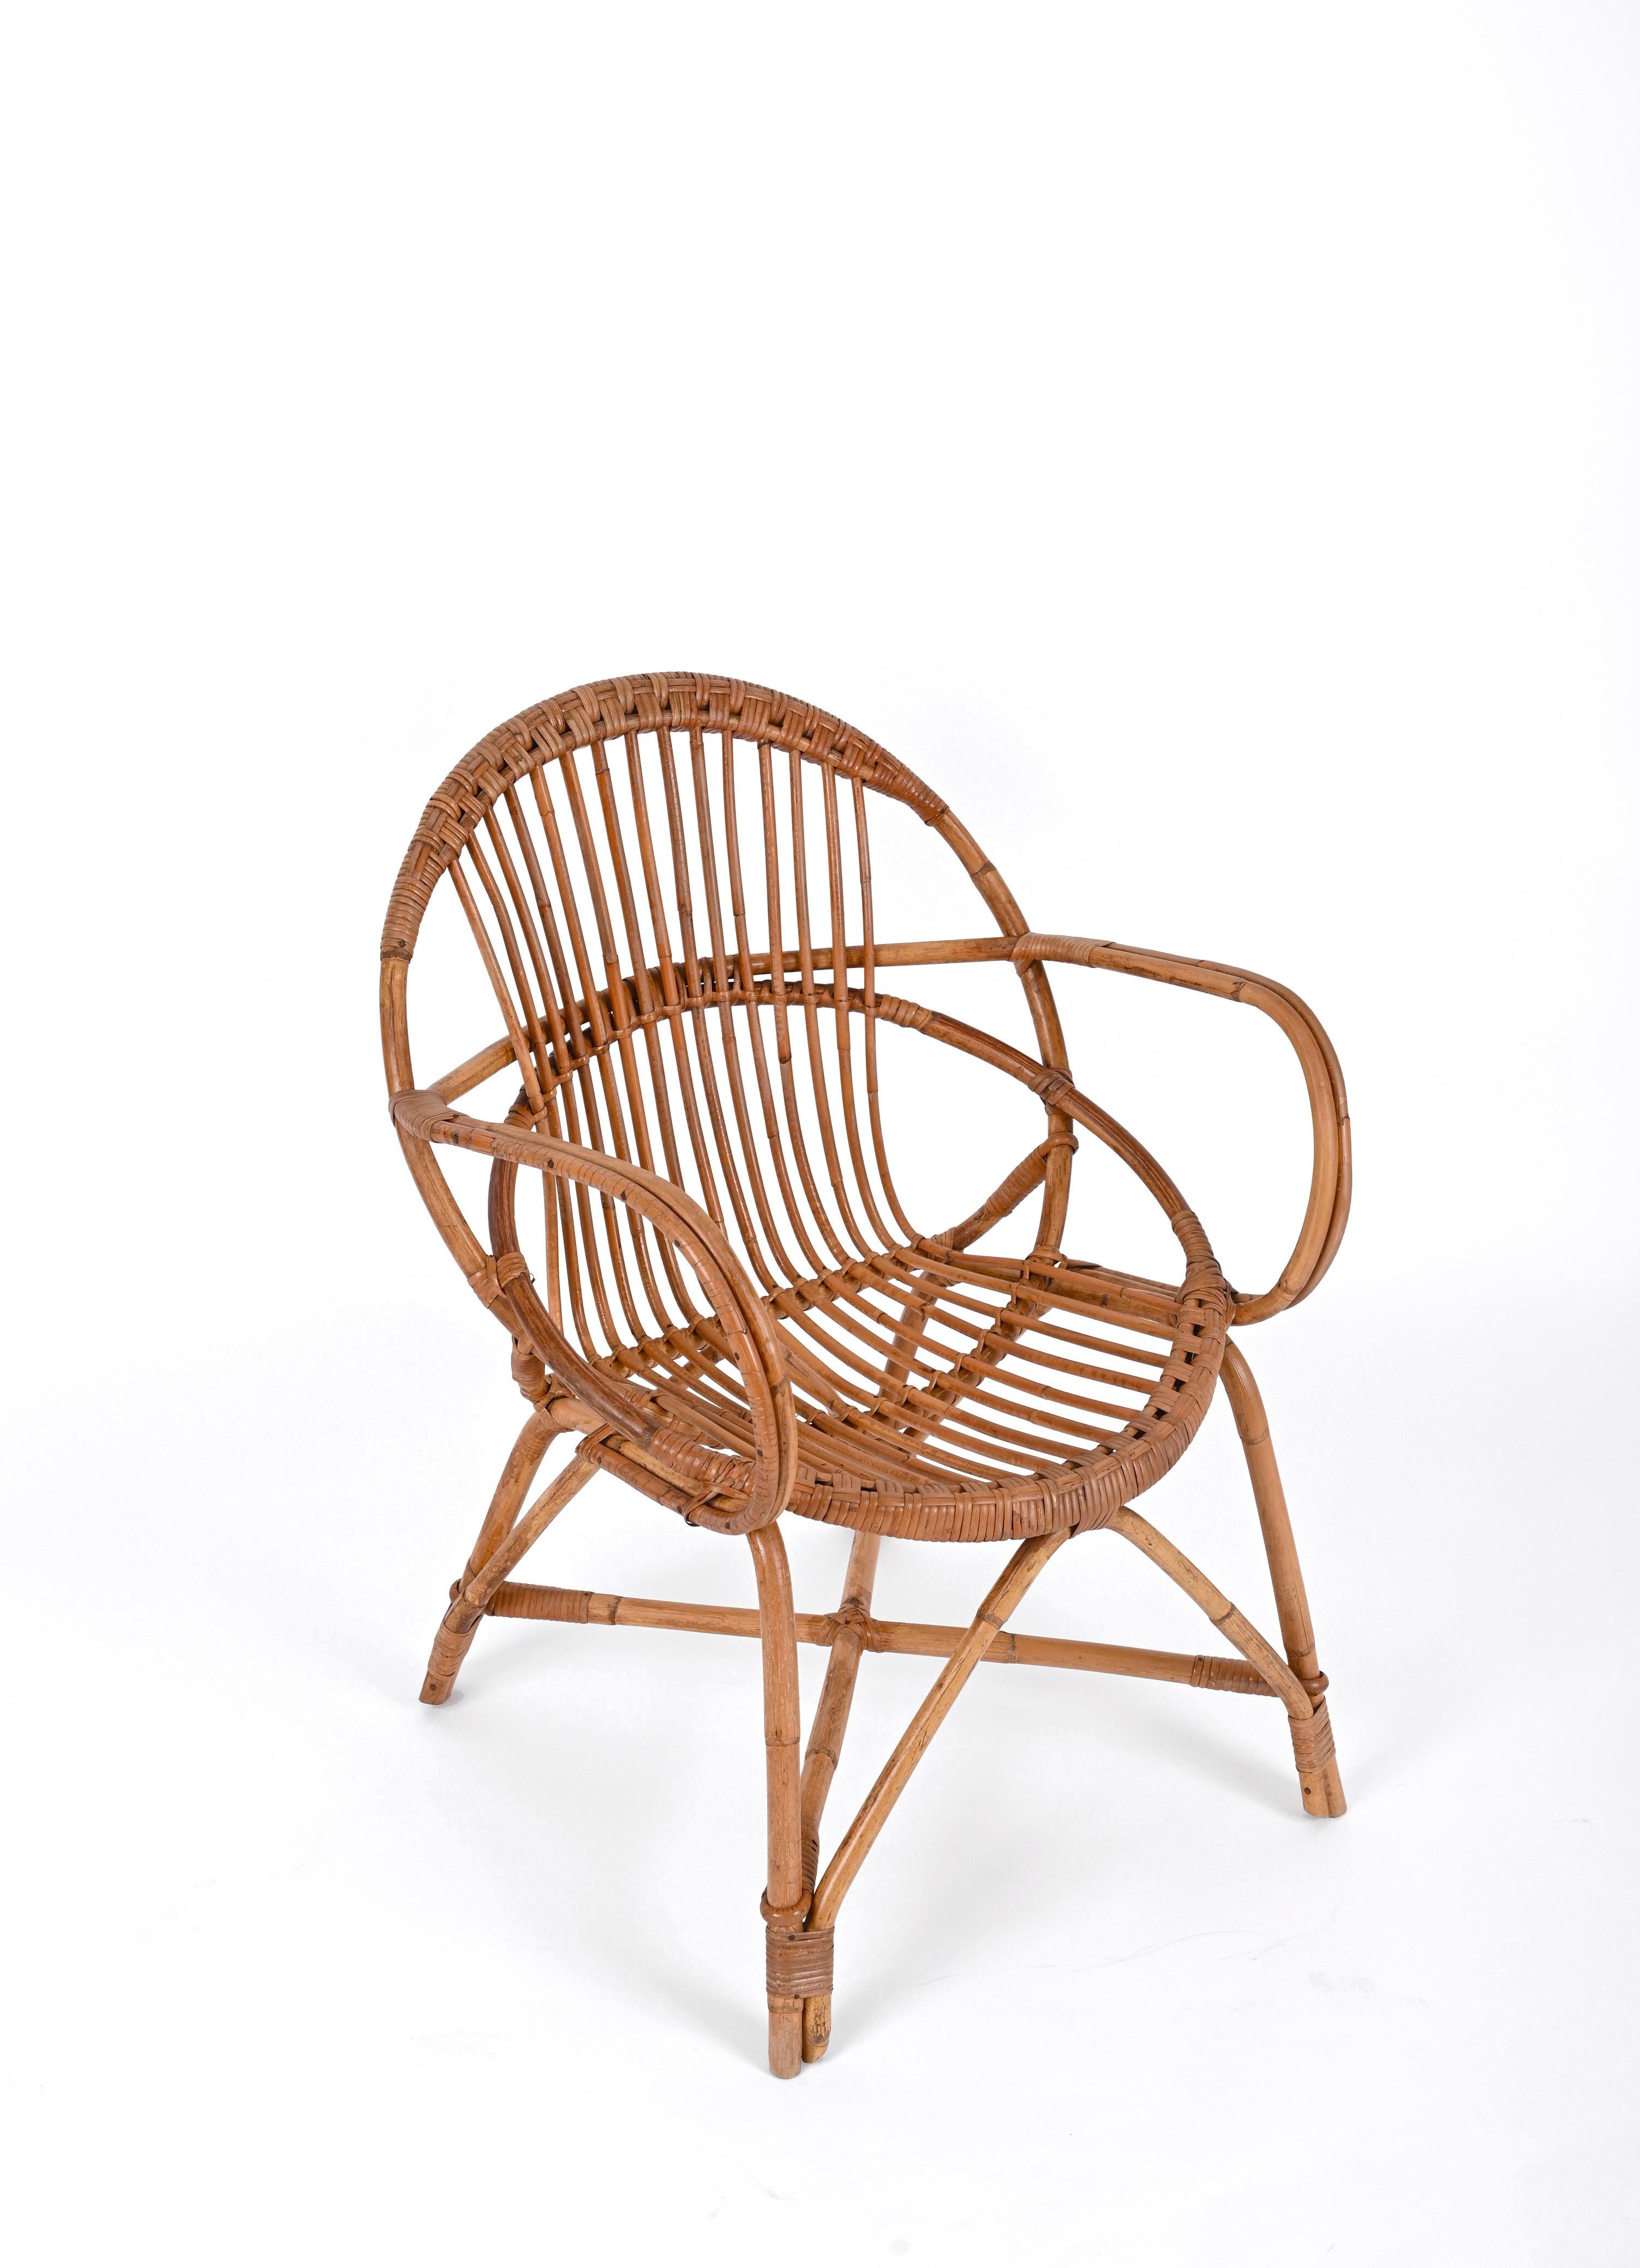 Midcentury Franco Albini Rattan and Bamboo Shell-Shaped Armchair, Italy, 1950s For Sale 5